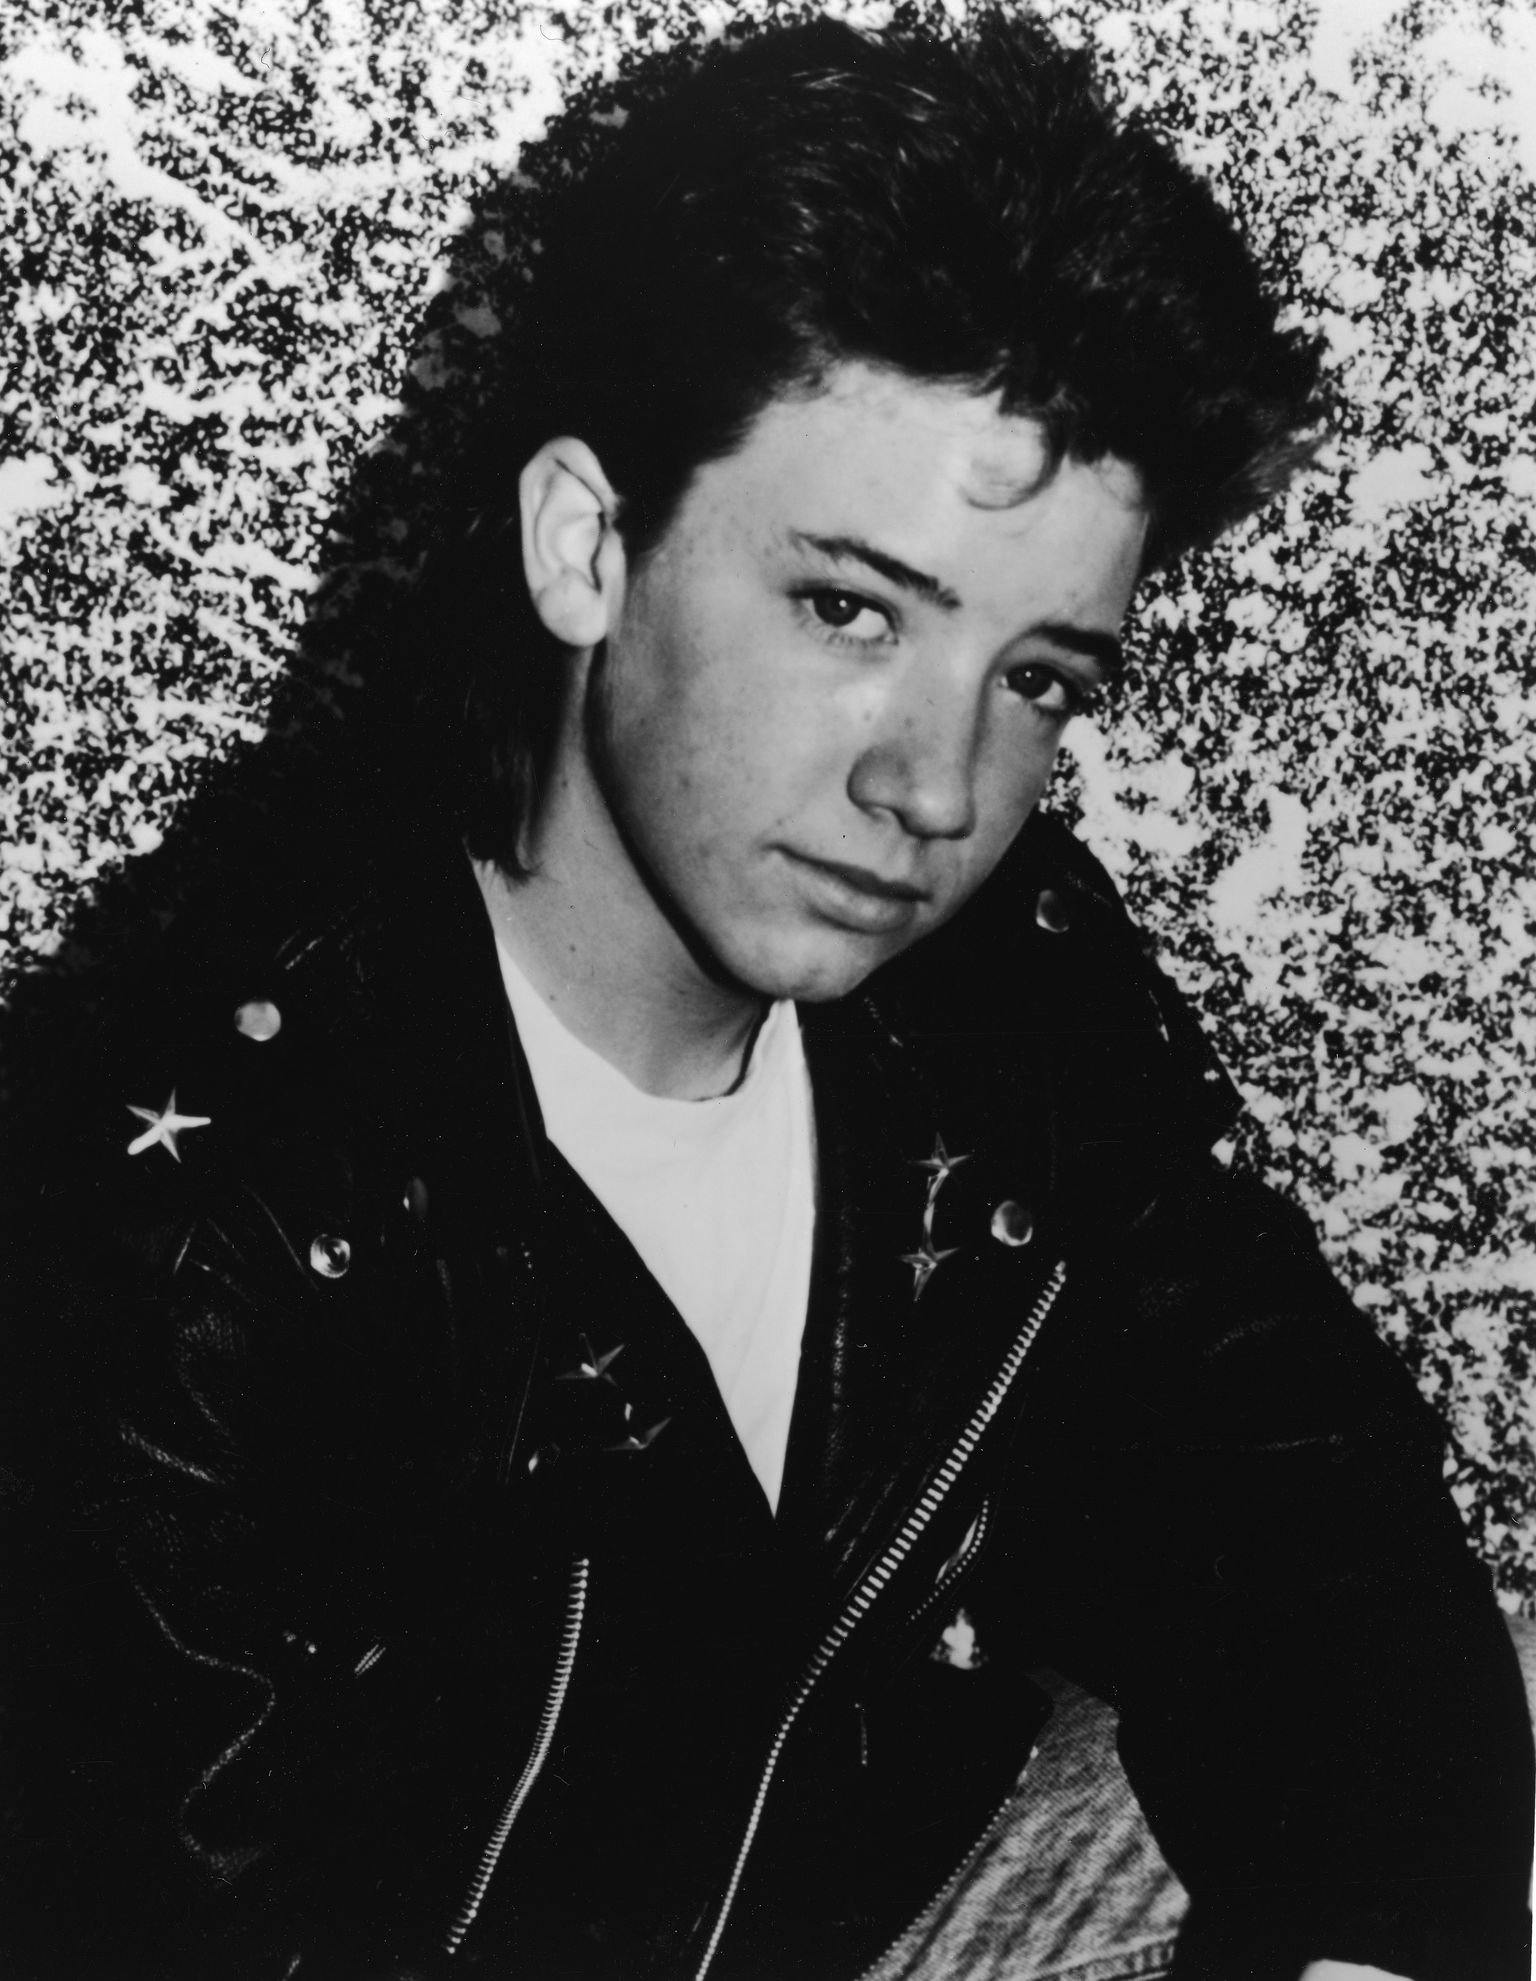 actor David Faustino wears a leather motorcycle jacket in a promotional portrait for the television series, "Married...With Children" | Getty Images